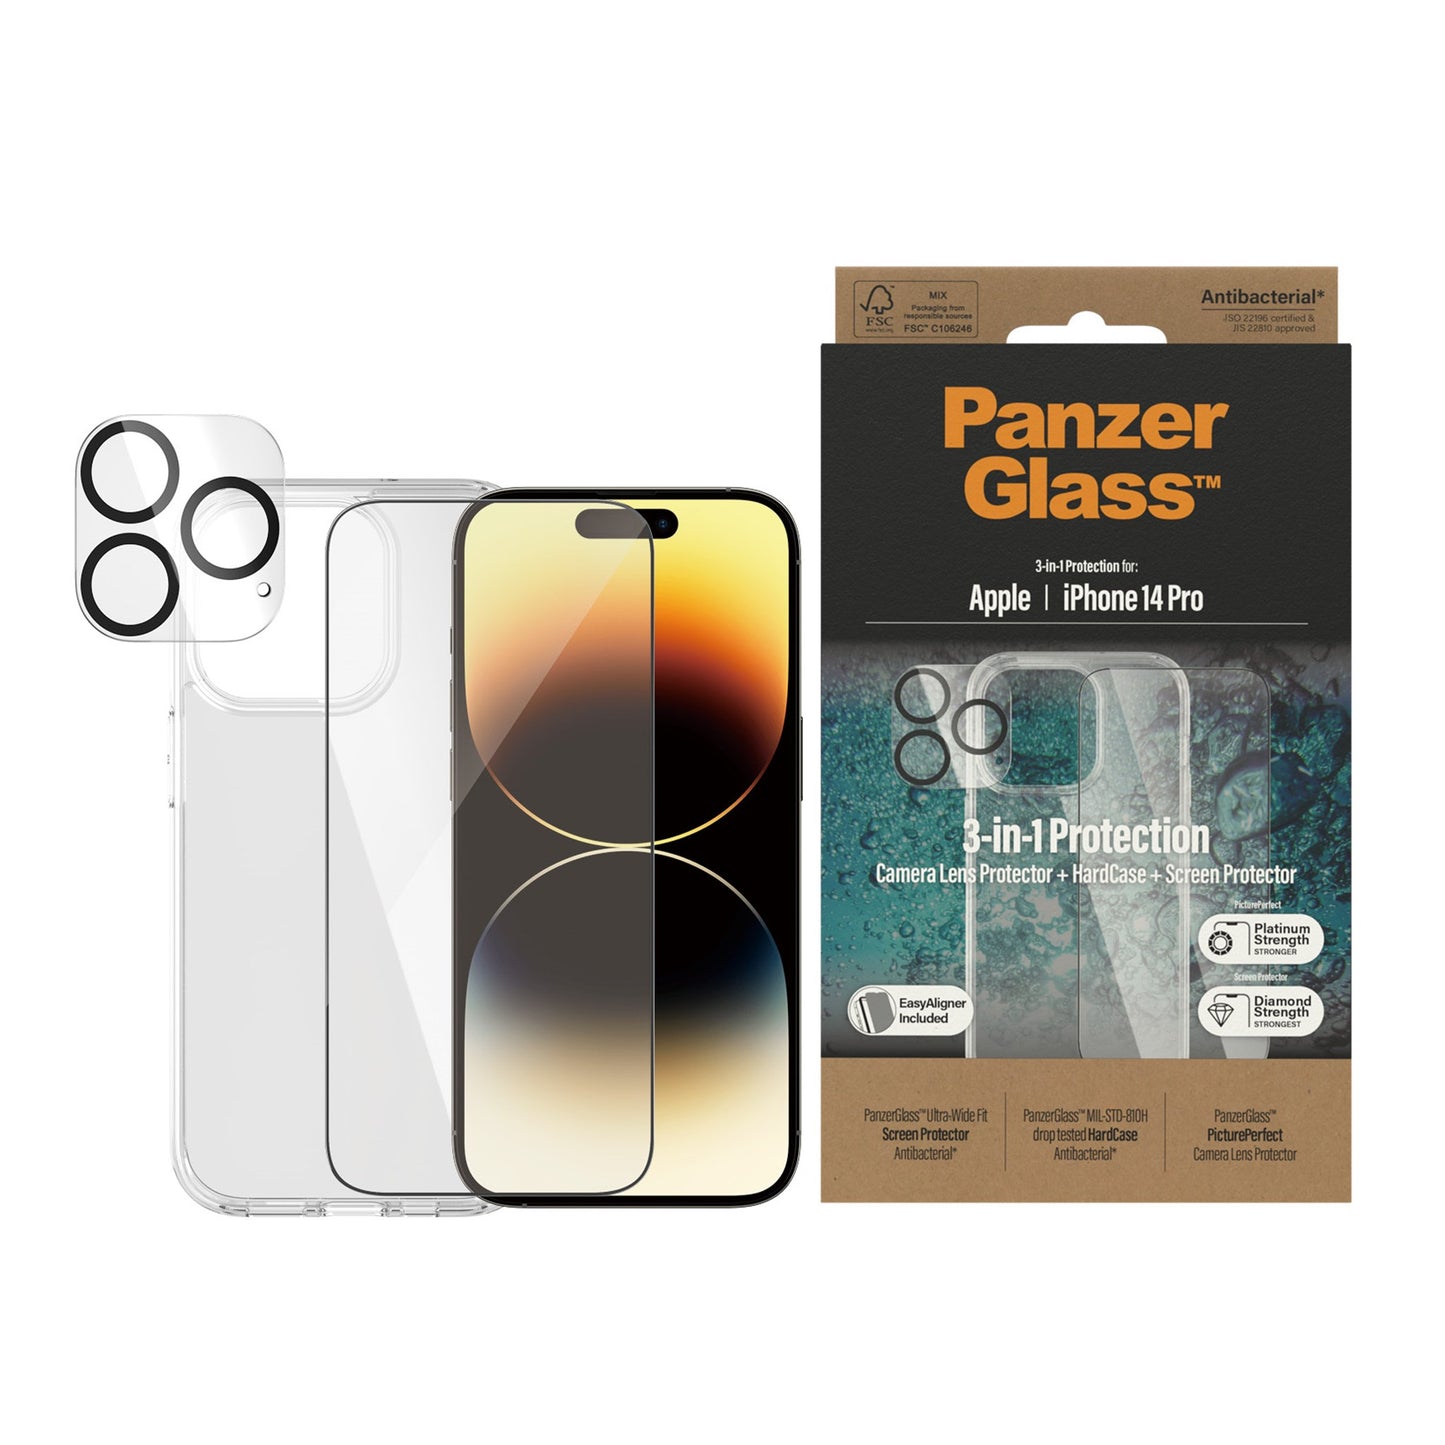 PanzerGlass™ 3-in-1 Protection Pack Apple iPhone 14 Pro 2